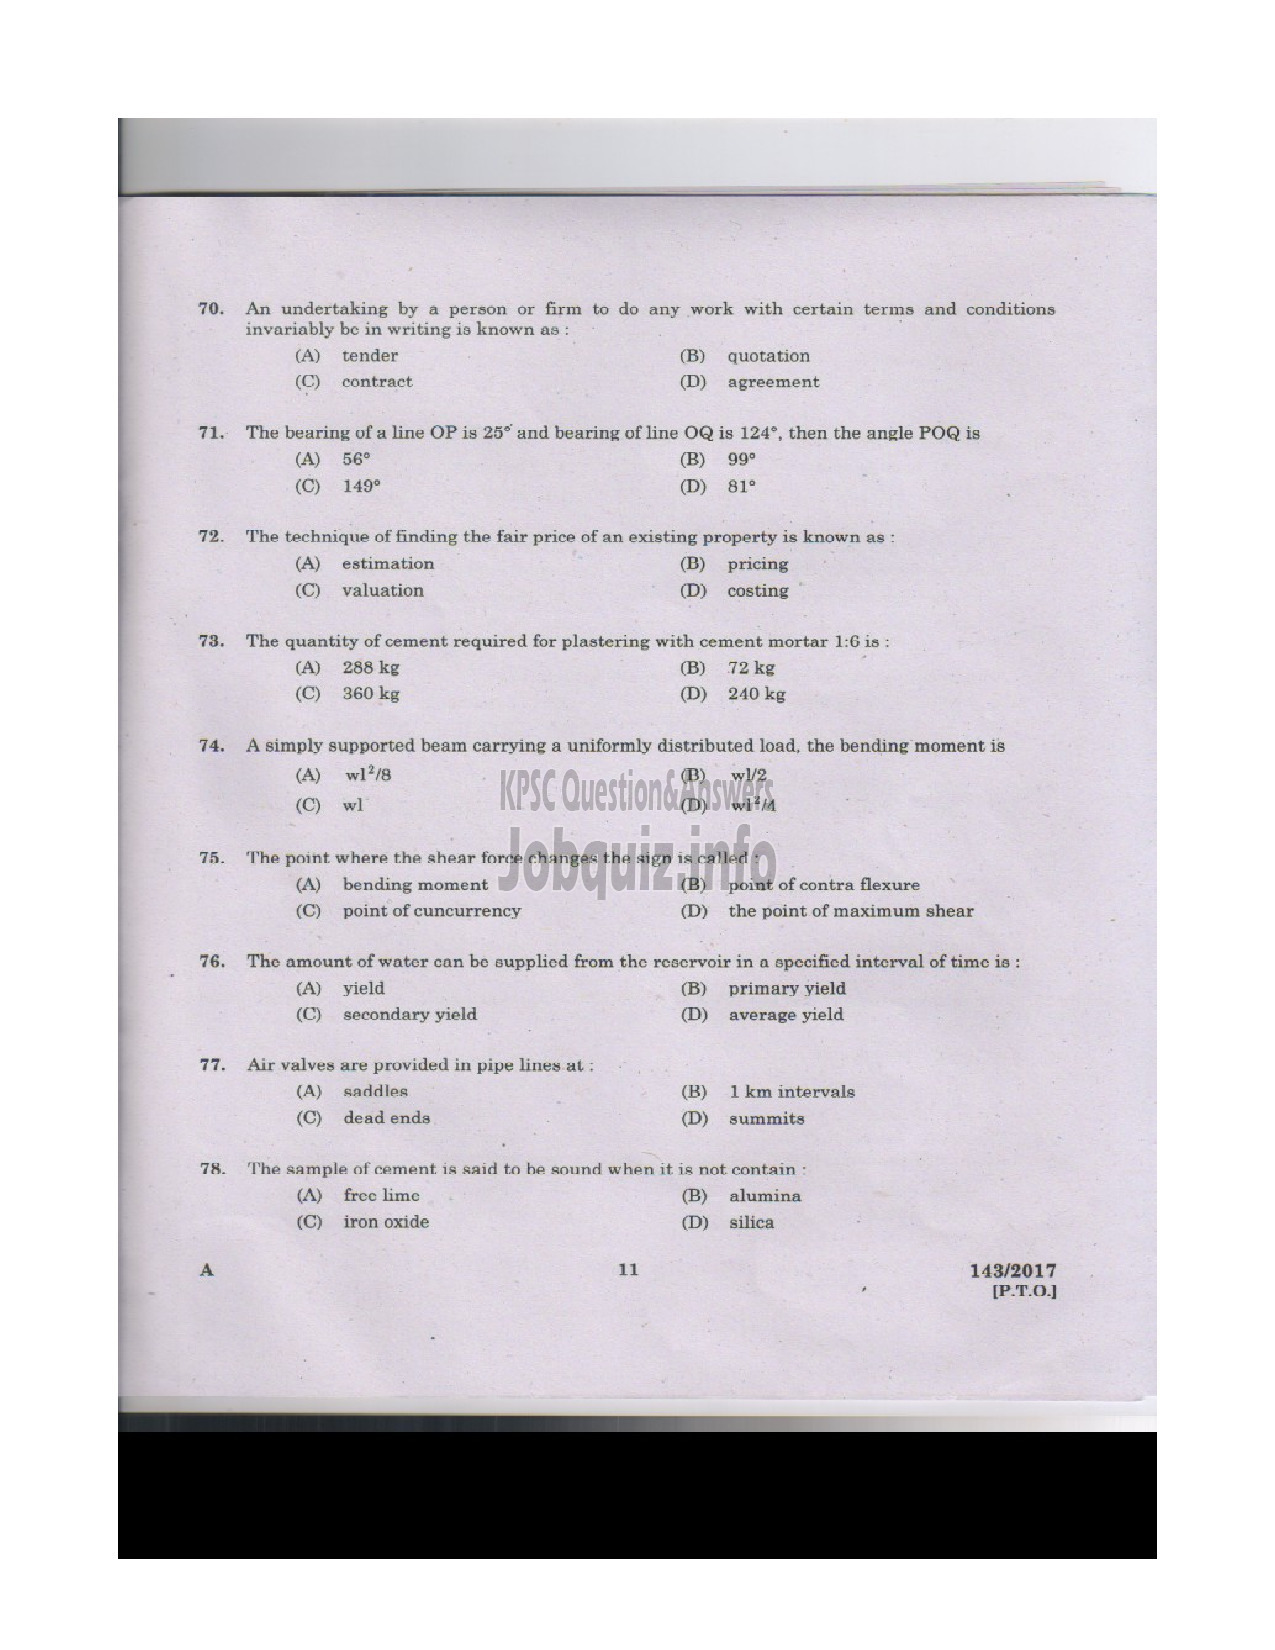 Kerala PSC Question Paper - VOCATIONAL INSTRUCTOR IN CIVIL CONSTRUCTION ANDMAINTENANCE VOCATIONAL HIGHER SECONDARY-10